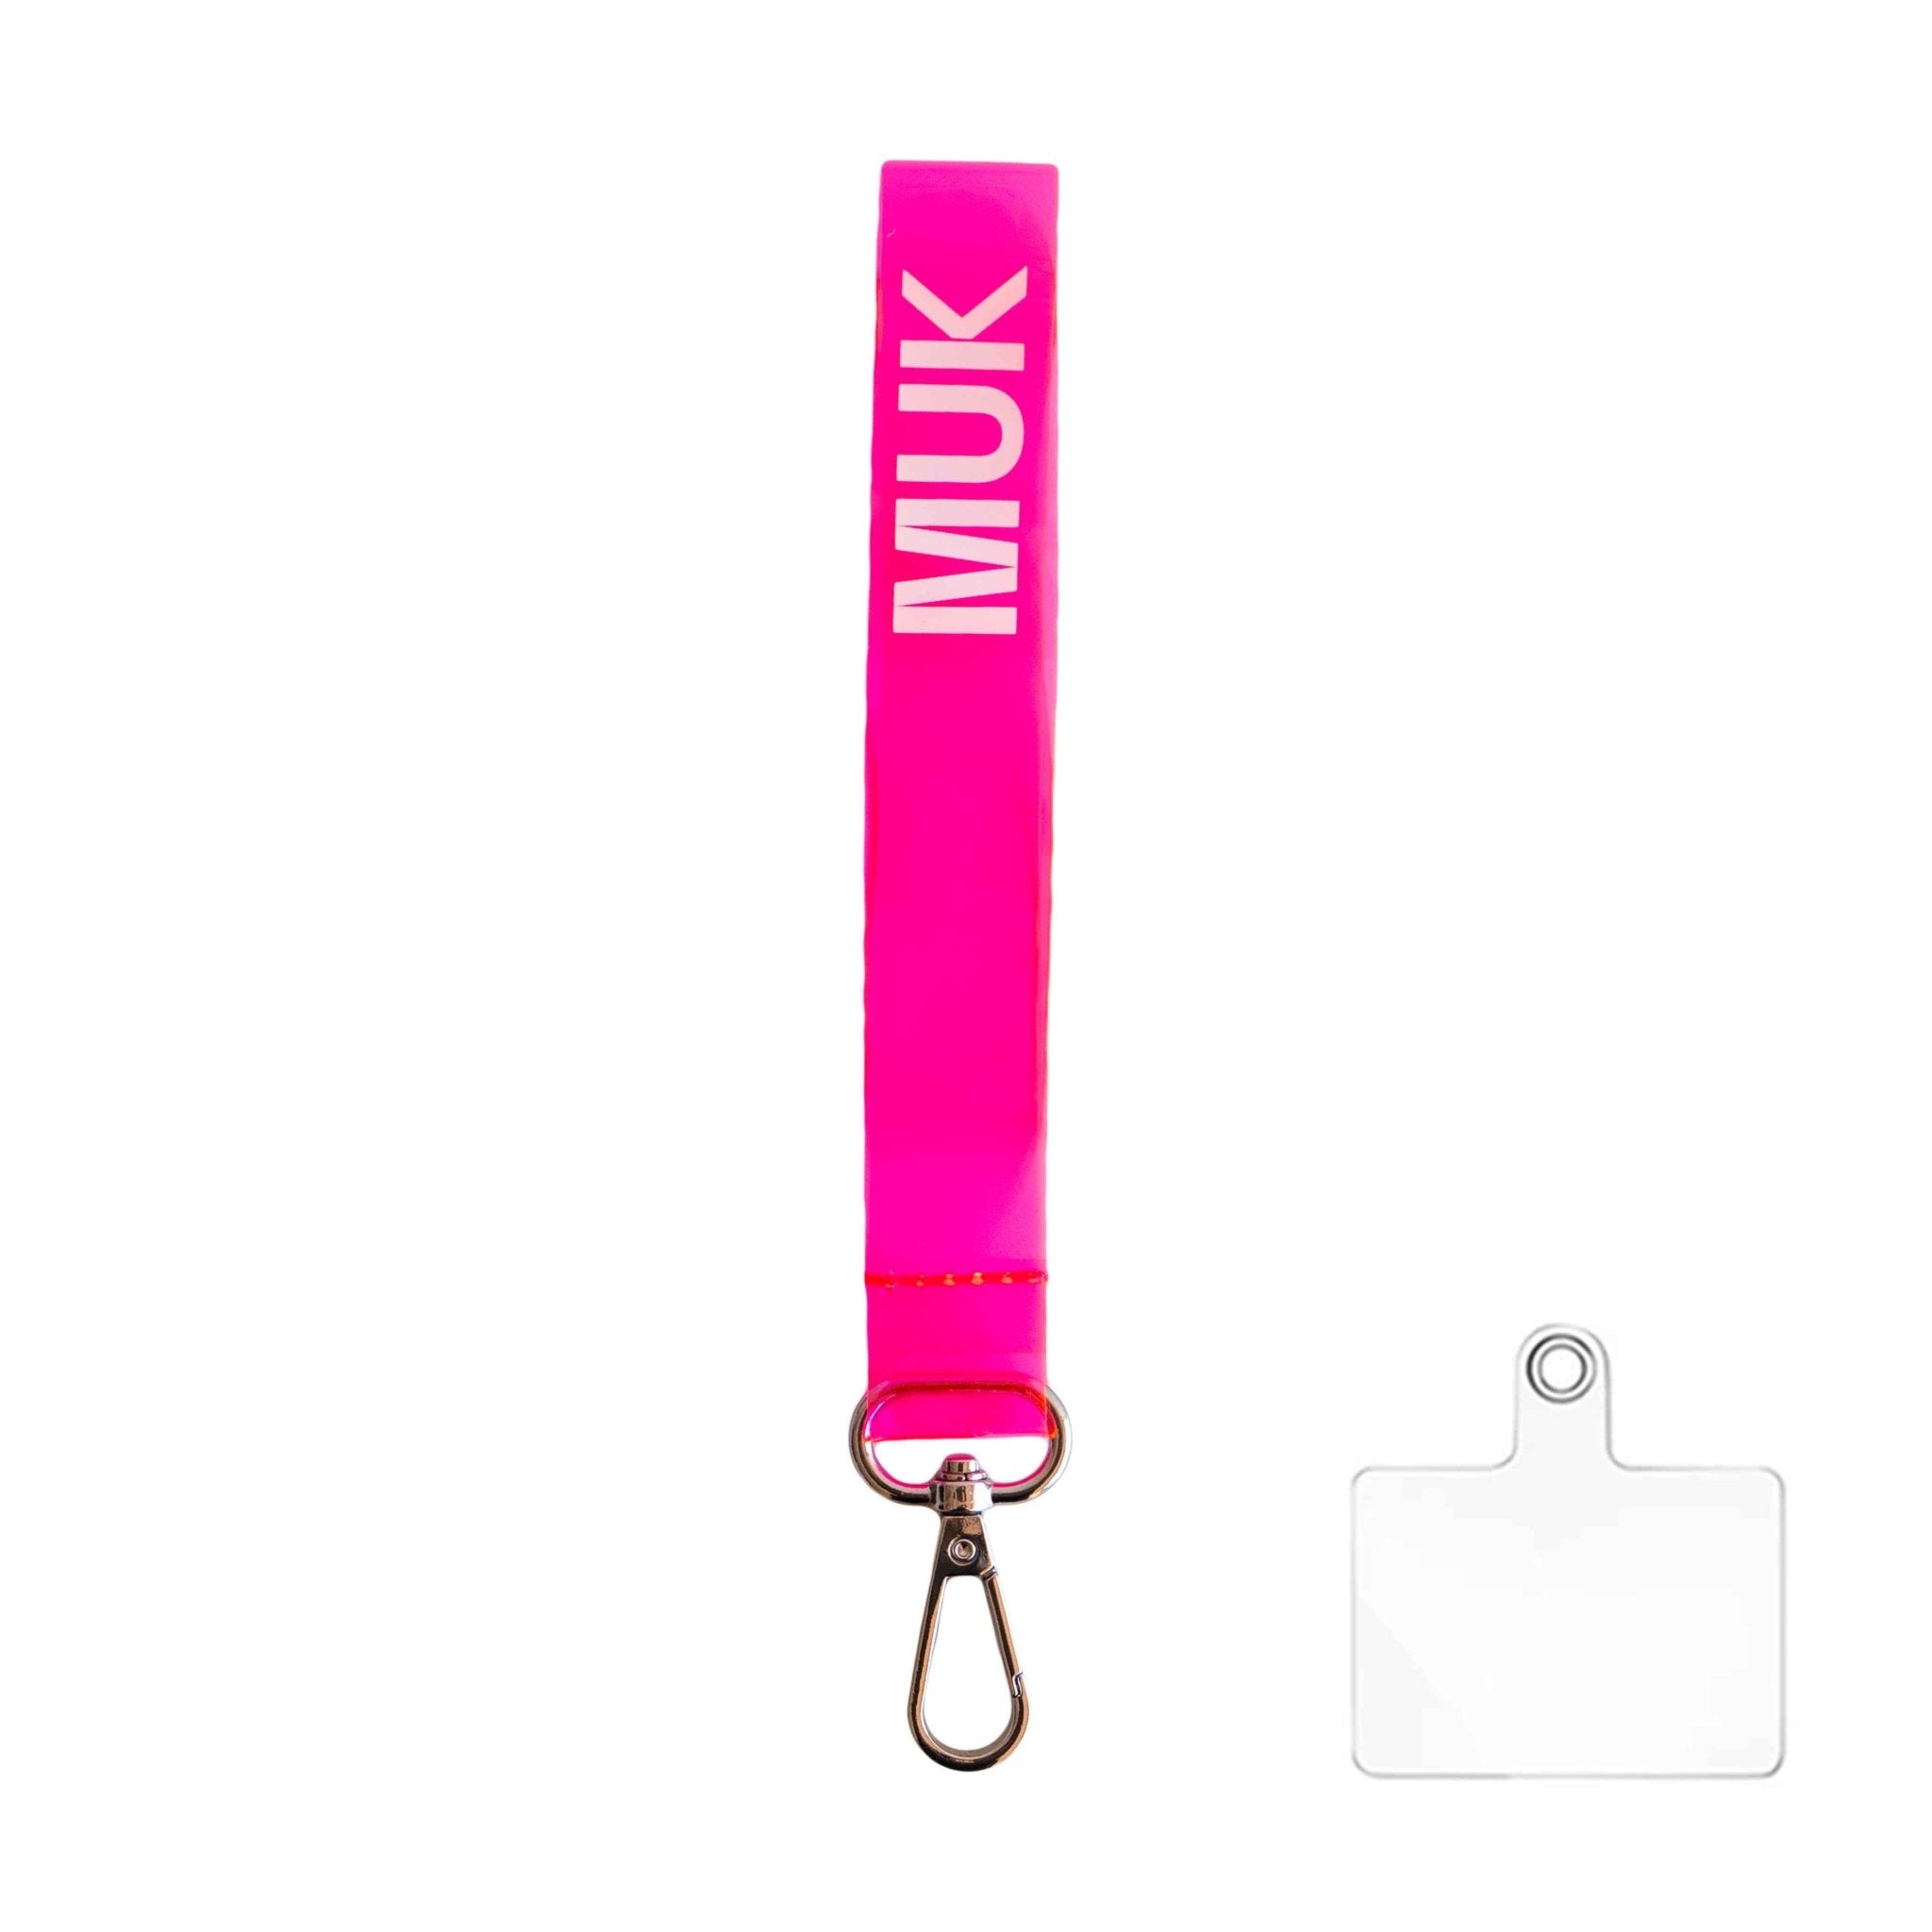 Fluor pink semi-transparent phone strap with the option of personalization and the Muk logo. It has a carabiner to use as a phonestrap with the universal phone strap adapter (included), or as a key ring.
